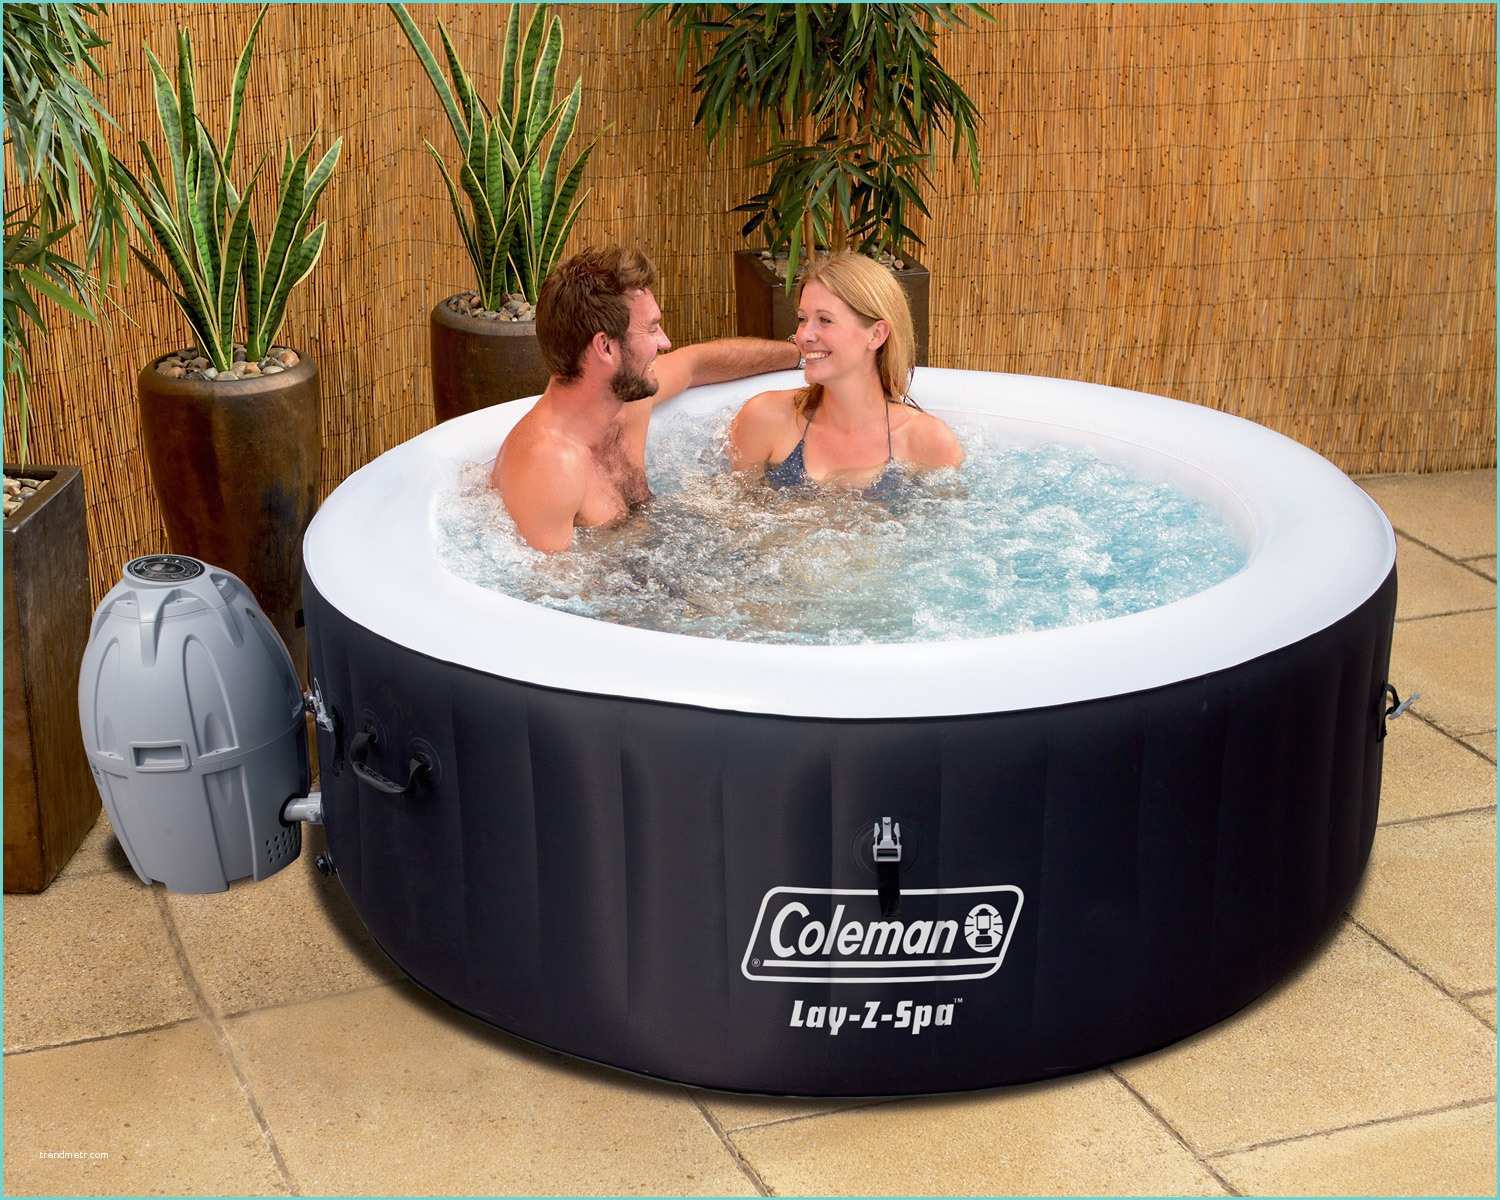 Spa Jacuzzi En Kit Coleman Saluspa 4 Person Inflatable Spa Hot Tub with